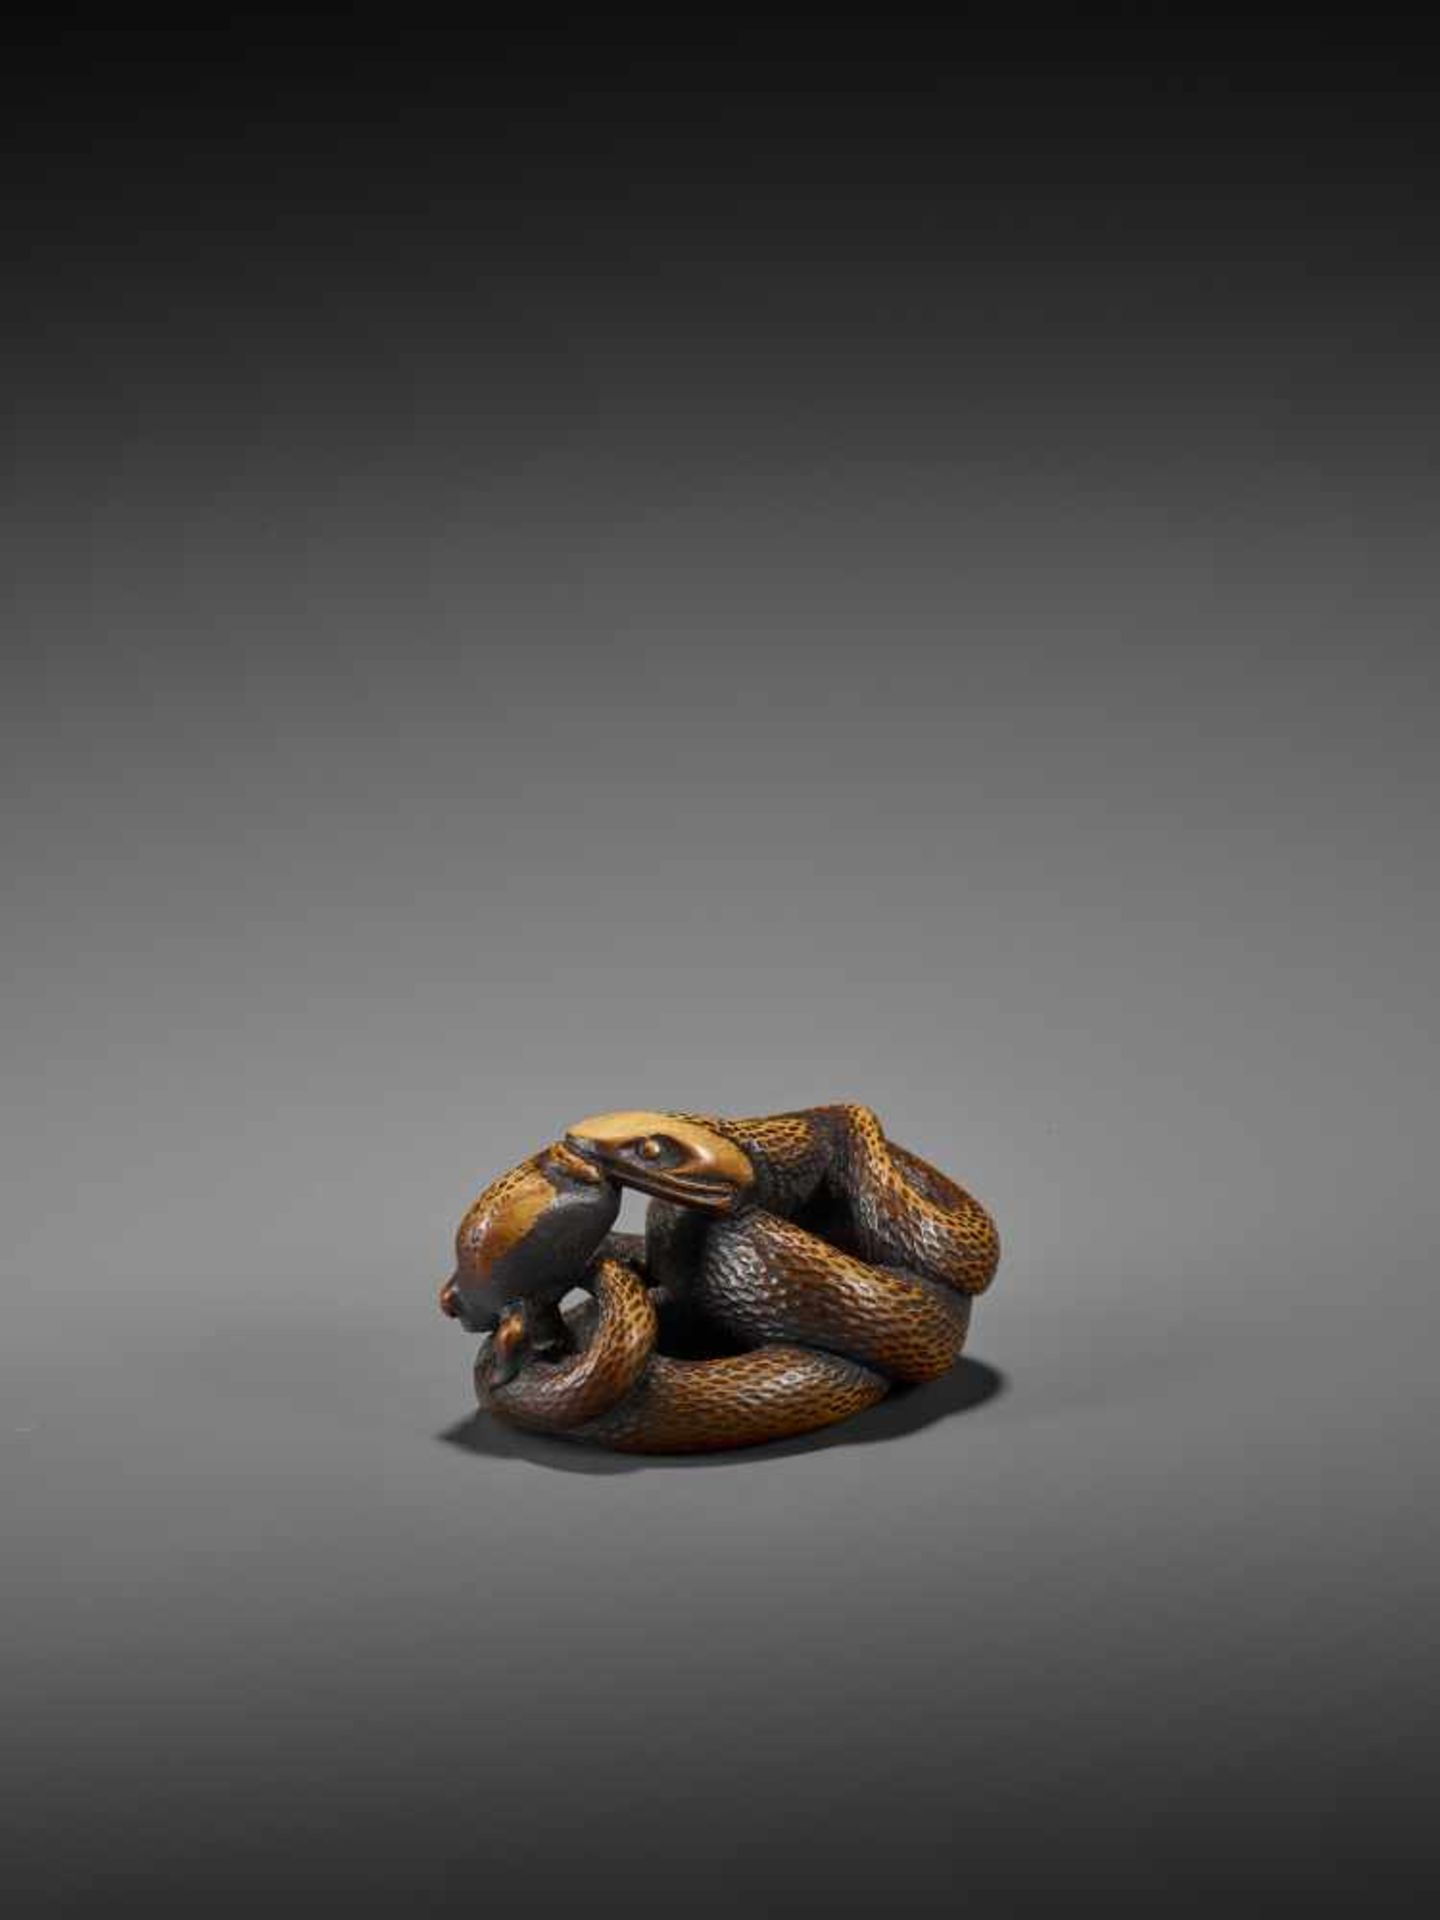 AN EXCELLENT WOOD NETSUKE OF A FROG WITH SNAKE, SANSUKUMI UnsignedJapan, late 18th century, Edo - Image 7 of 9